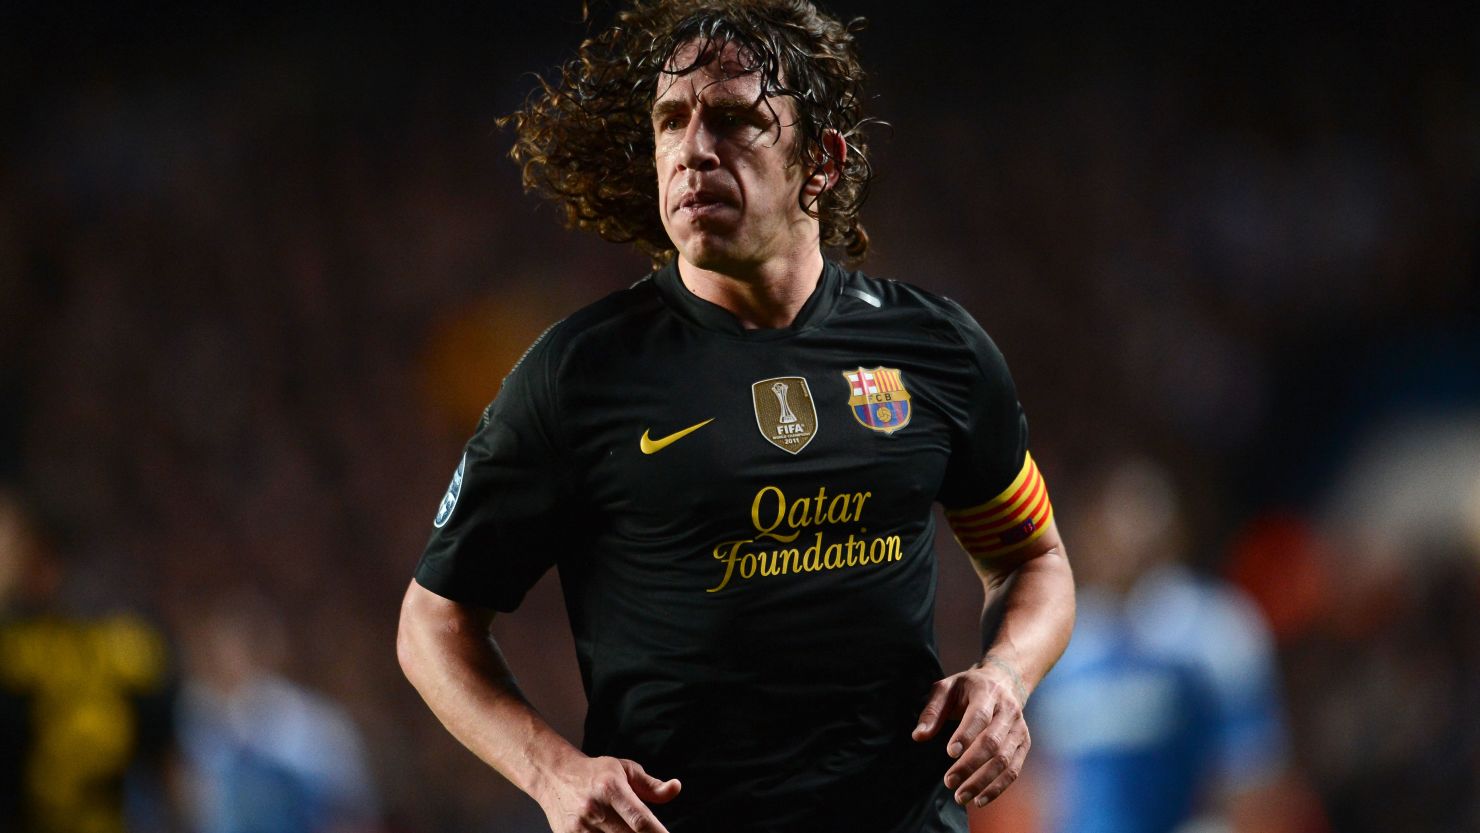 Barcelona defender Carles Puyol played all but seven minutes of Spain's successful World Cup campaign in 2010